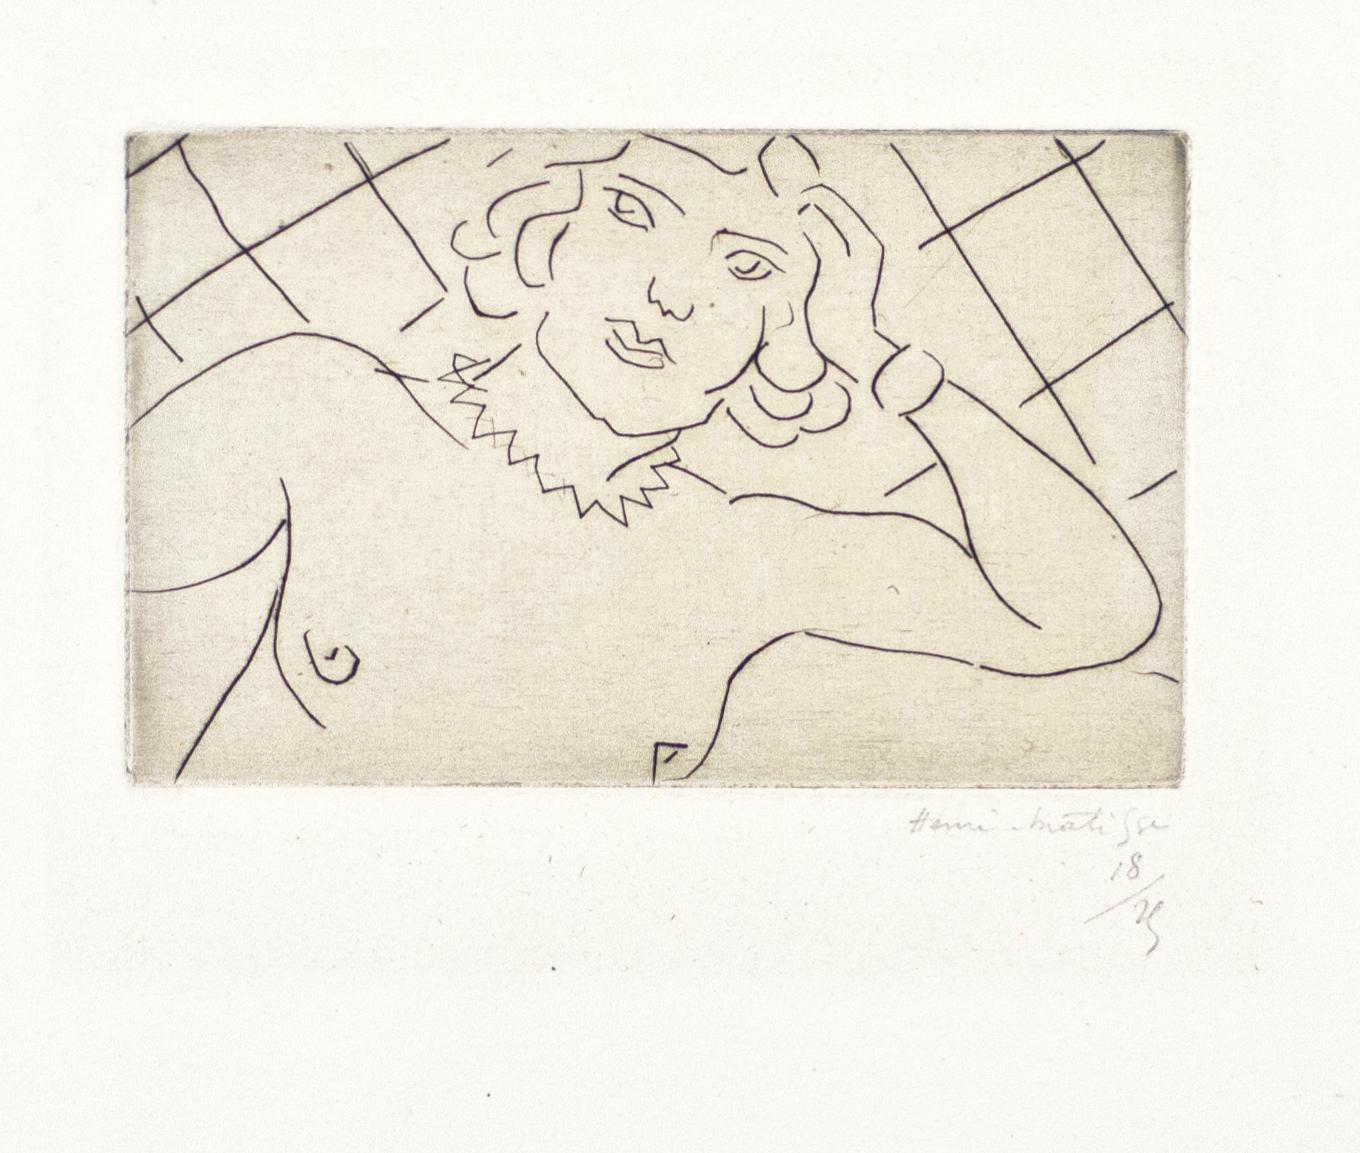 Torse, Fond à Losanges - Drypoint on China by H. Matisse, 1929